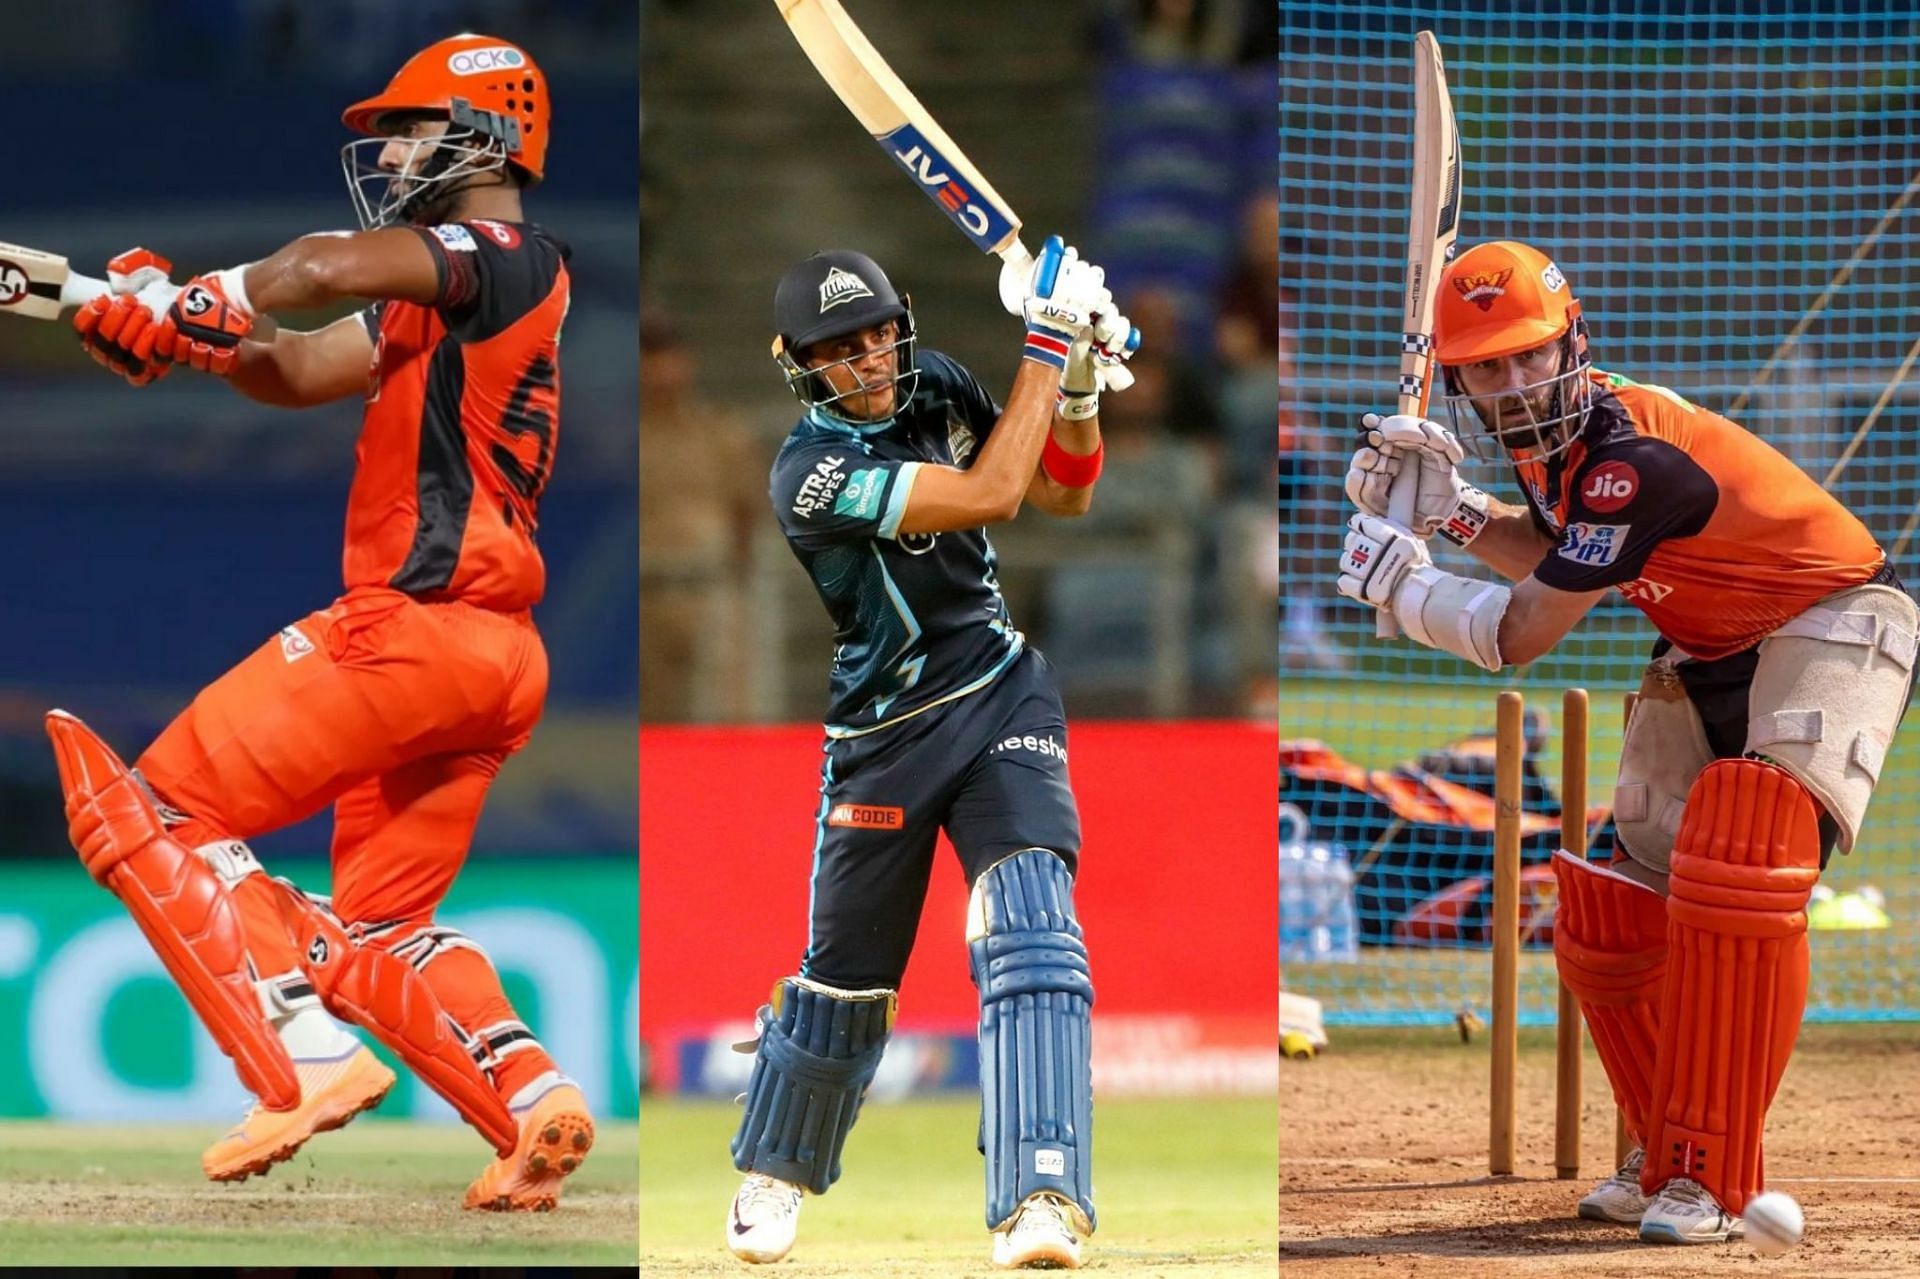 Match 21 of the IPL 2022 will be played between Sunrisers Hyderabad and Gujarat Titans